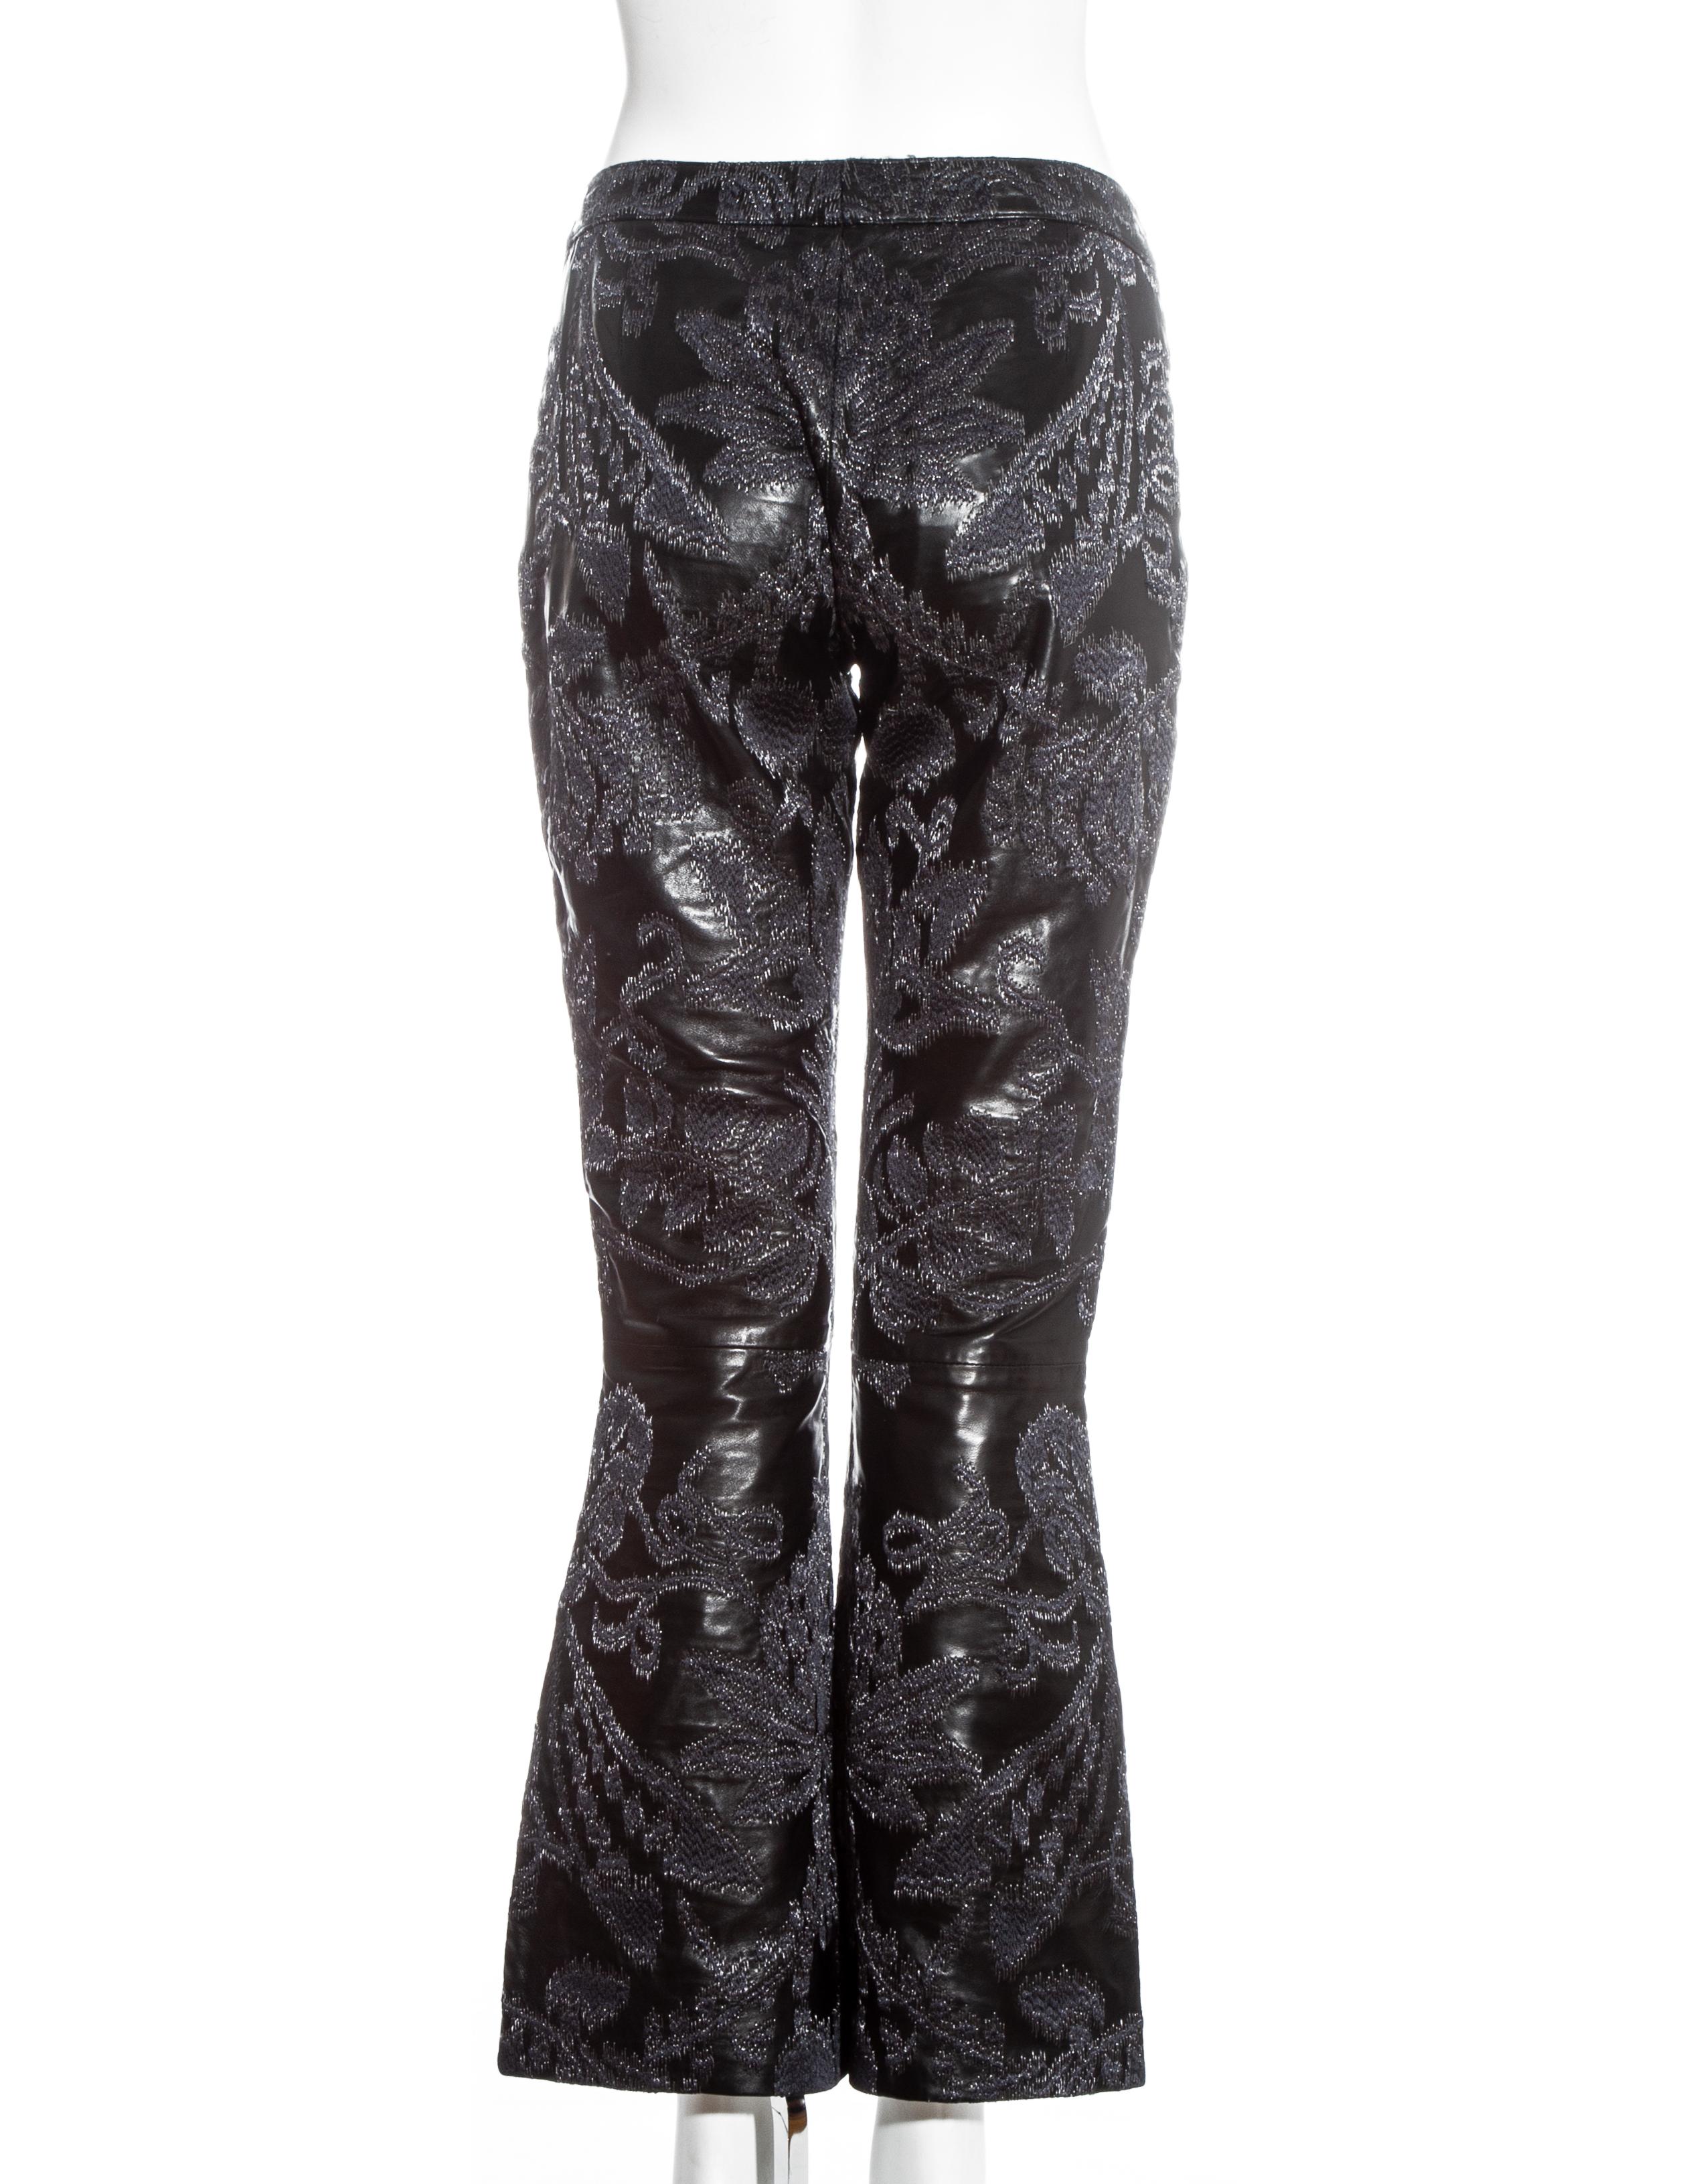 Gucci by Tom Ford black leather embroidered jacquard pants, ss 2000 1